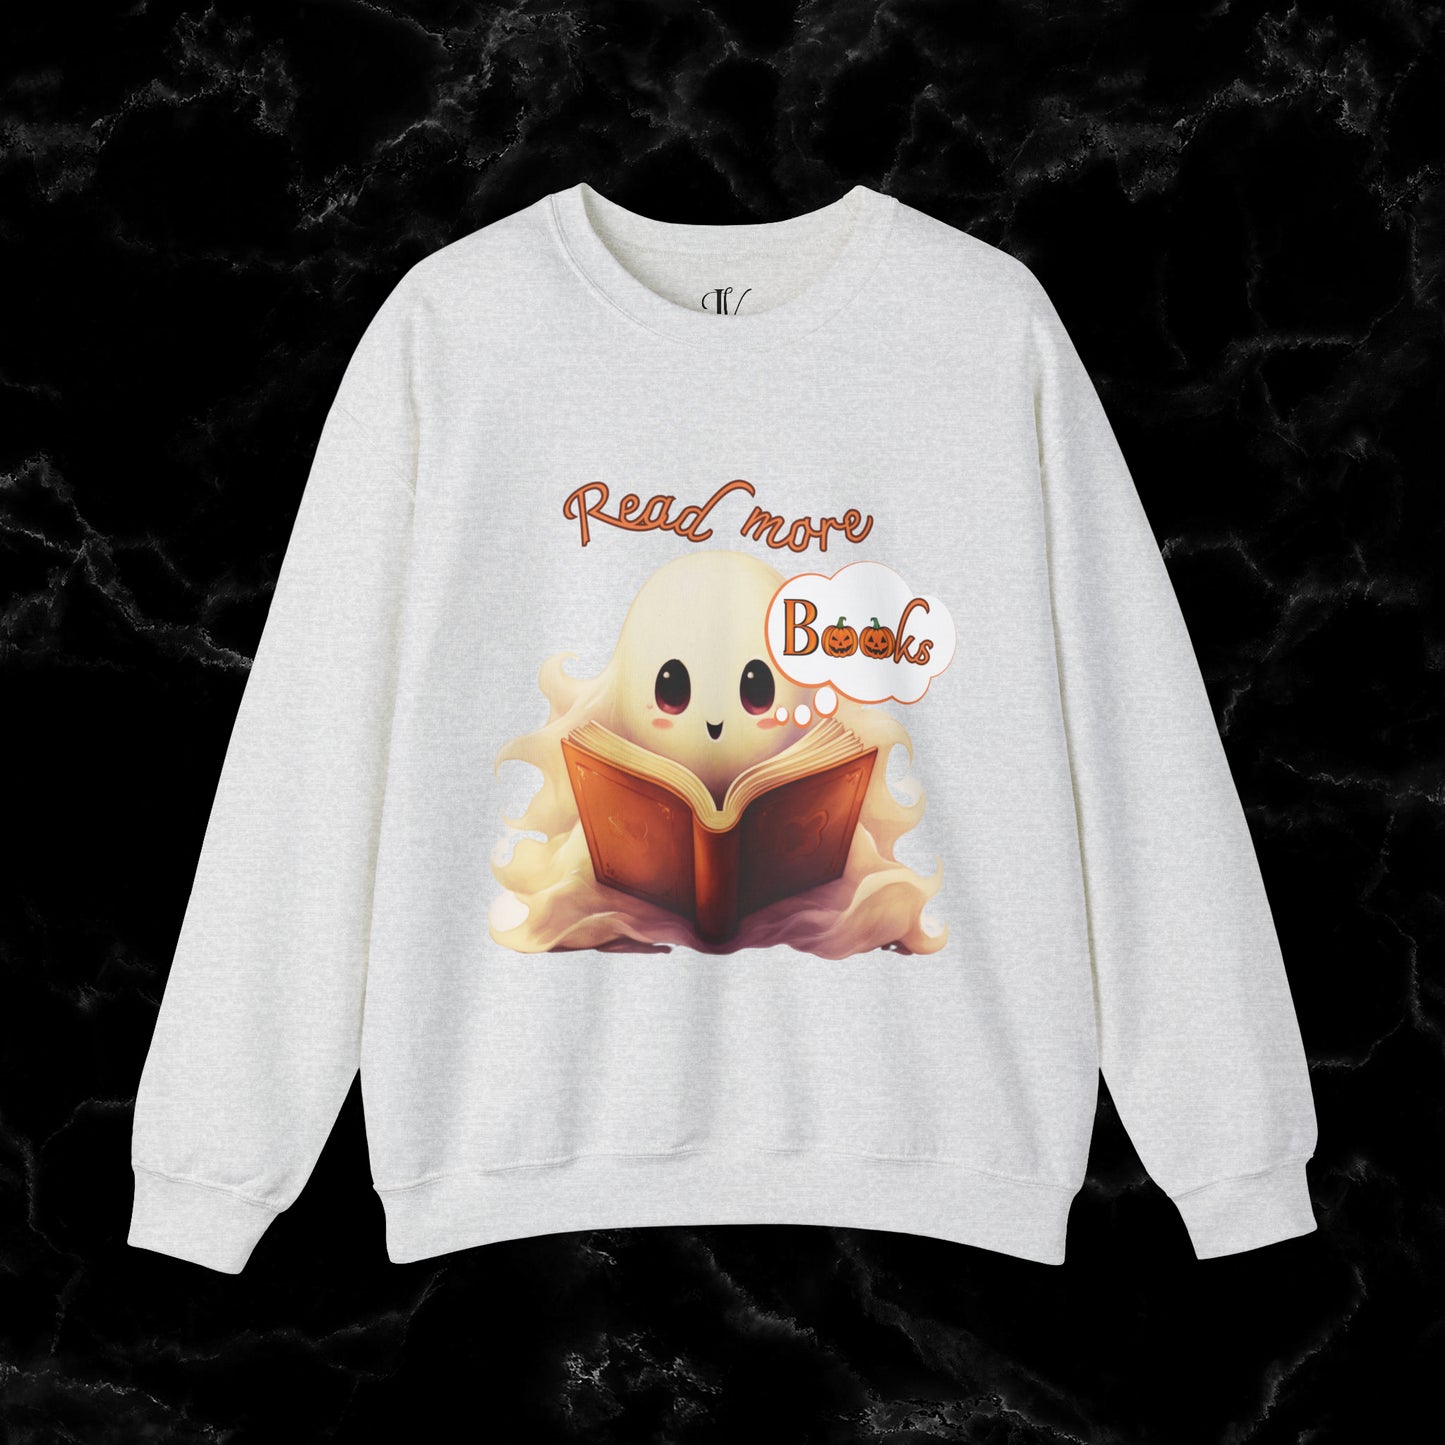 Read More Books Sweatshirt - Book Lover Halloween Sweater for Librarians and Students Sweatshirt S Ash 